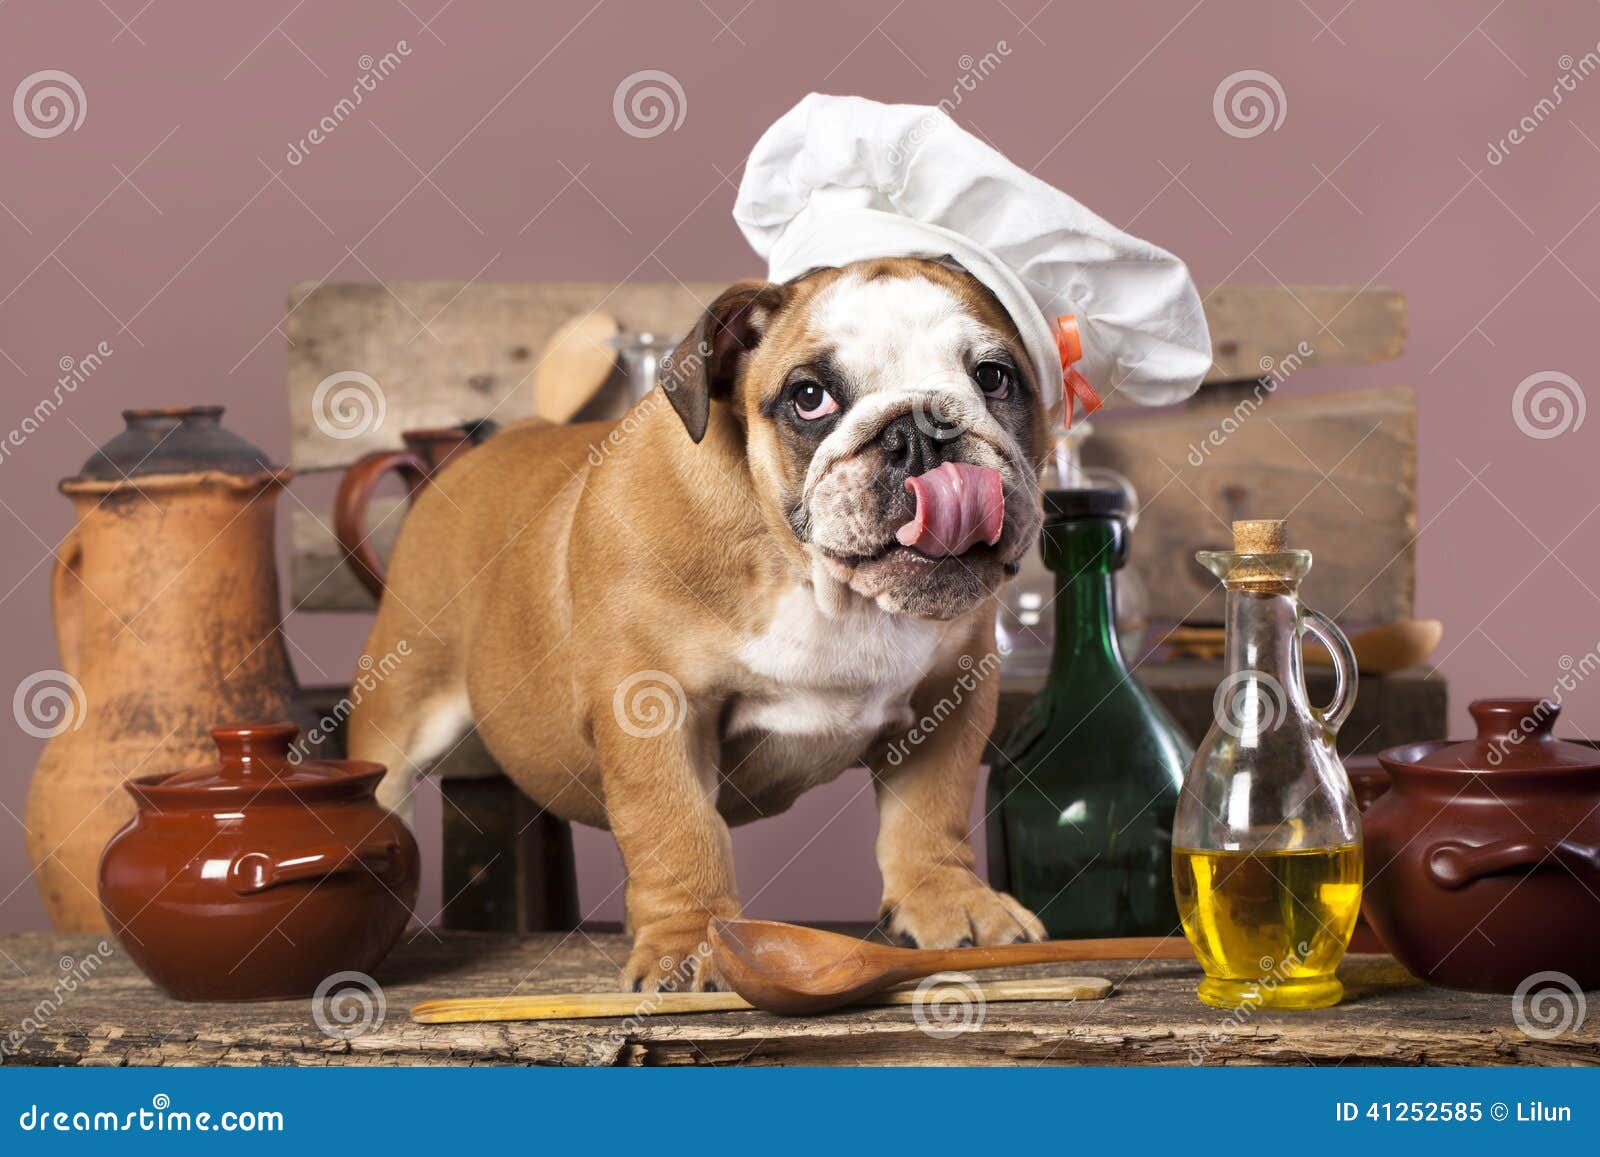 Puppy in chef s hat stock image. Image of english, cooking - 41252585